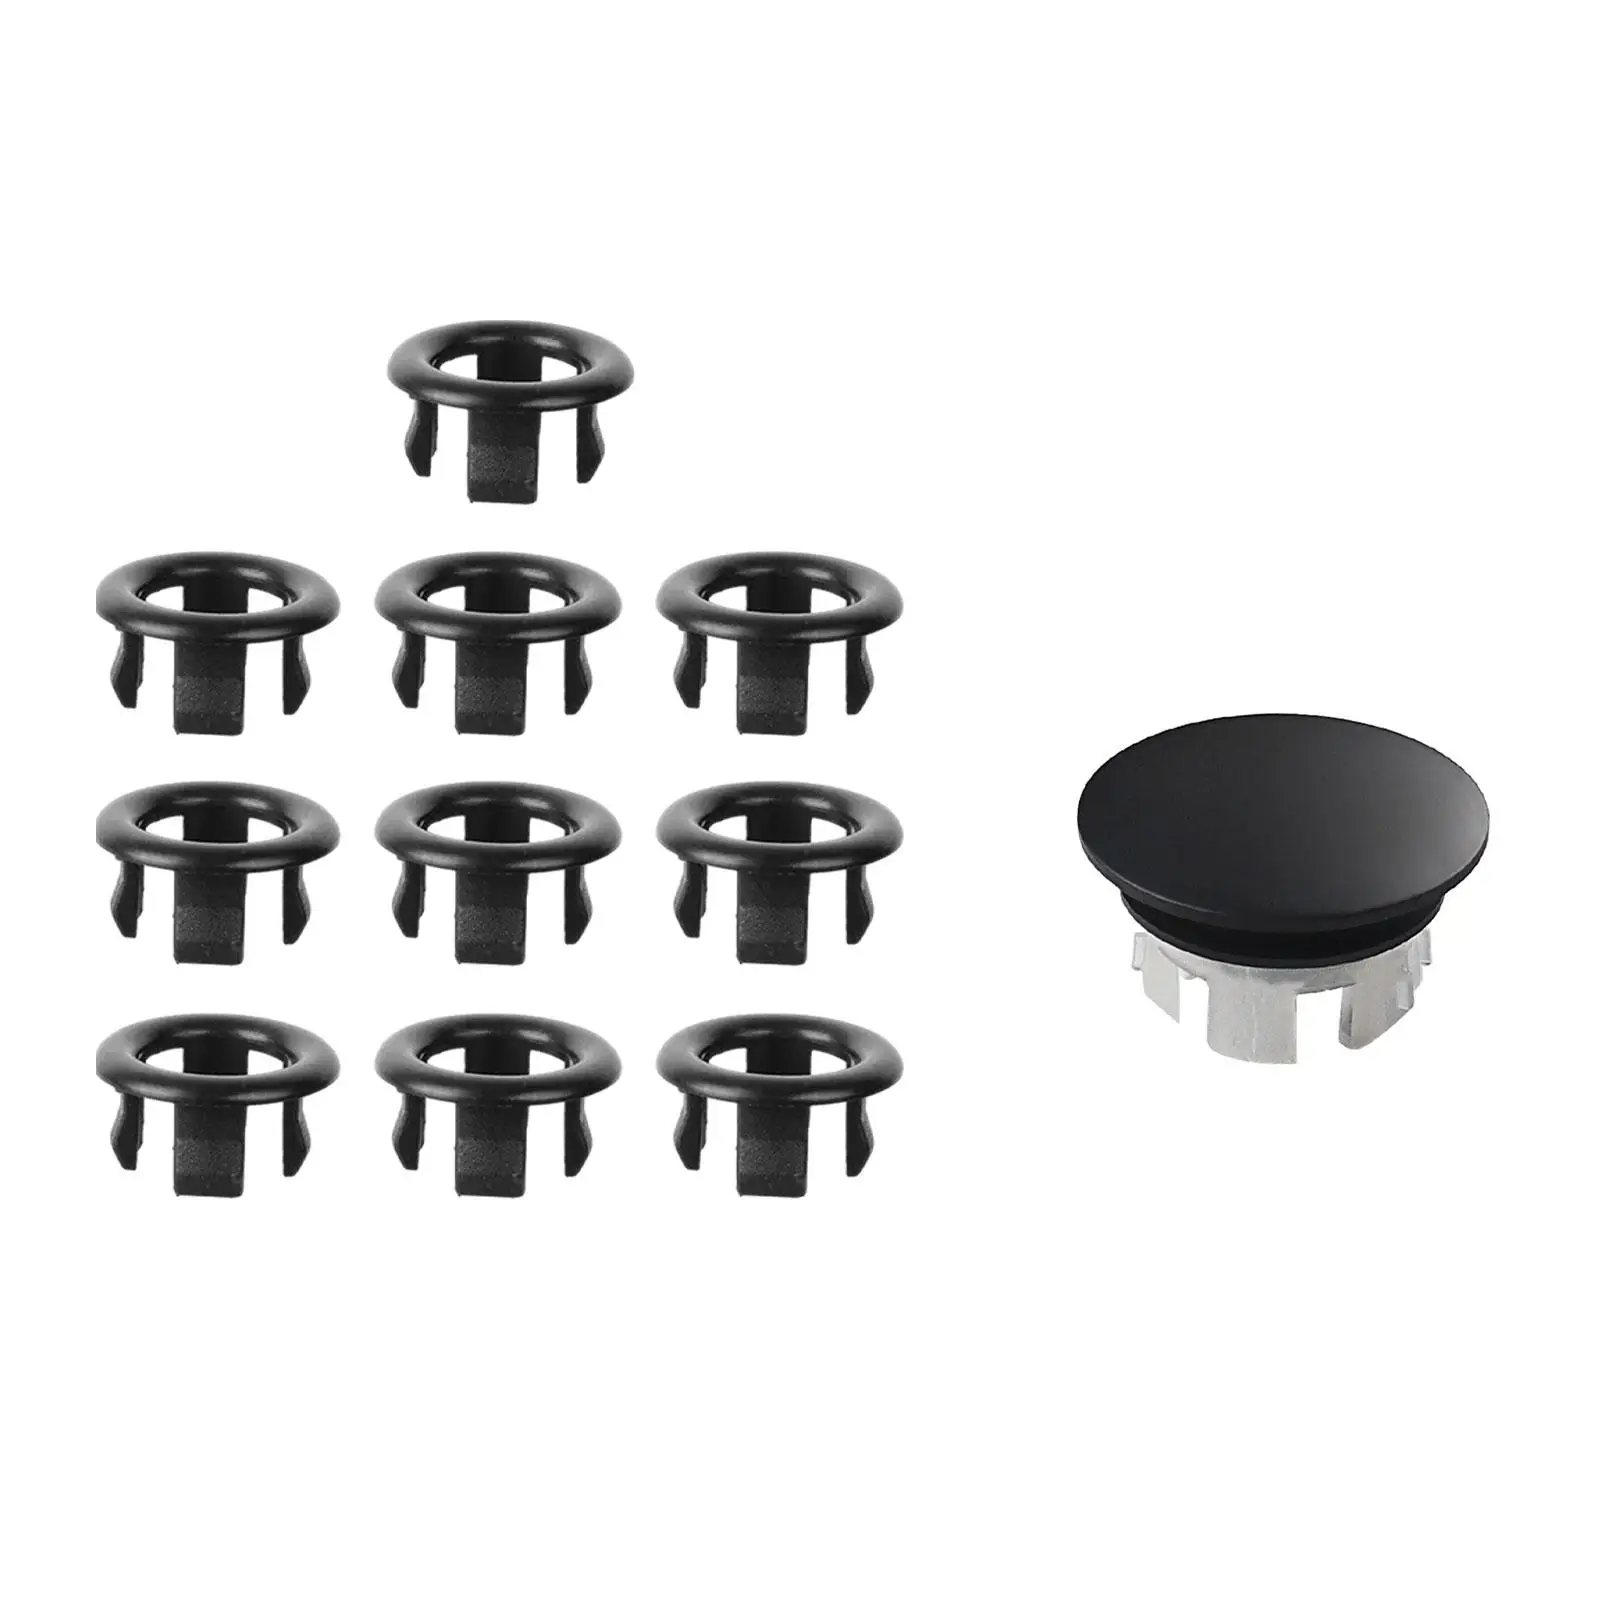 

10 Pieces Basin Sink Overflow Cap Sink Hole Cover Trim Ring Hole Insert Cap for Lavatory Restroom Bathroom Shopping Mall Bathtub